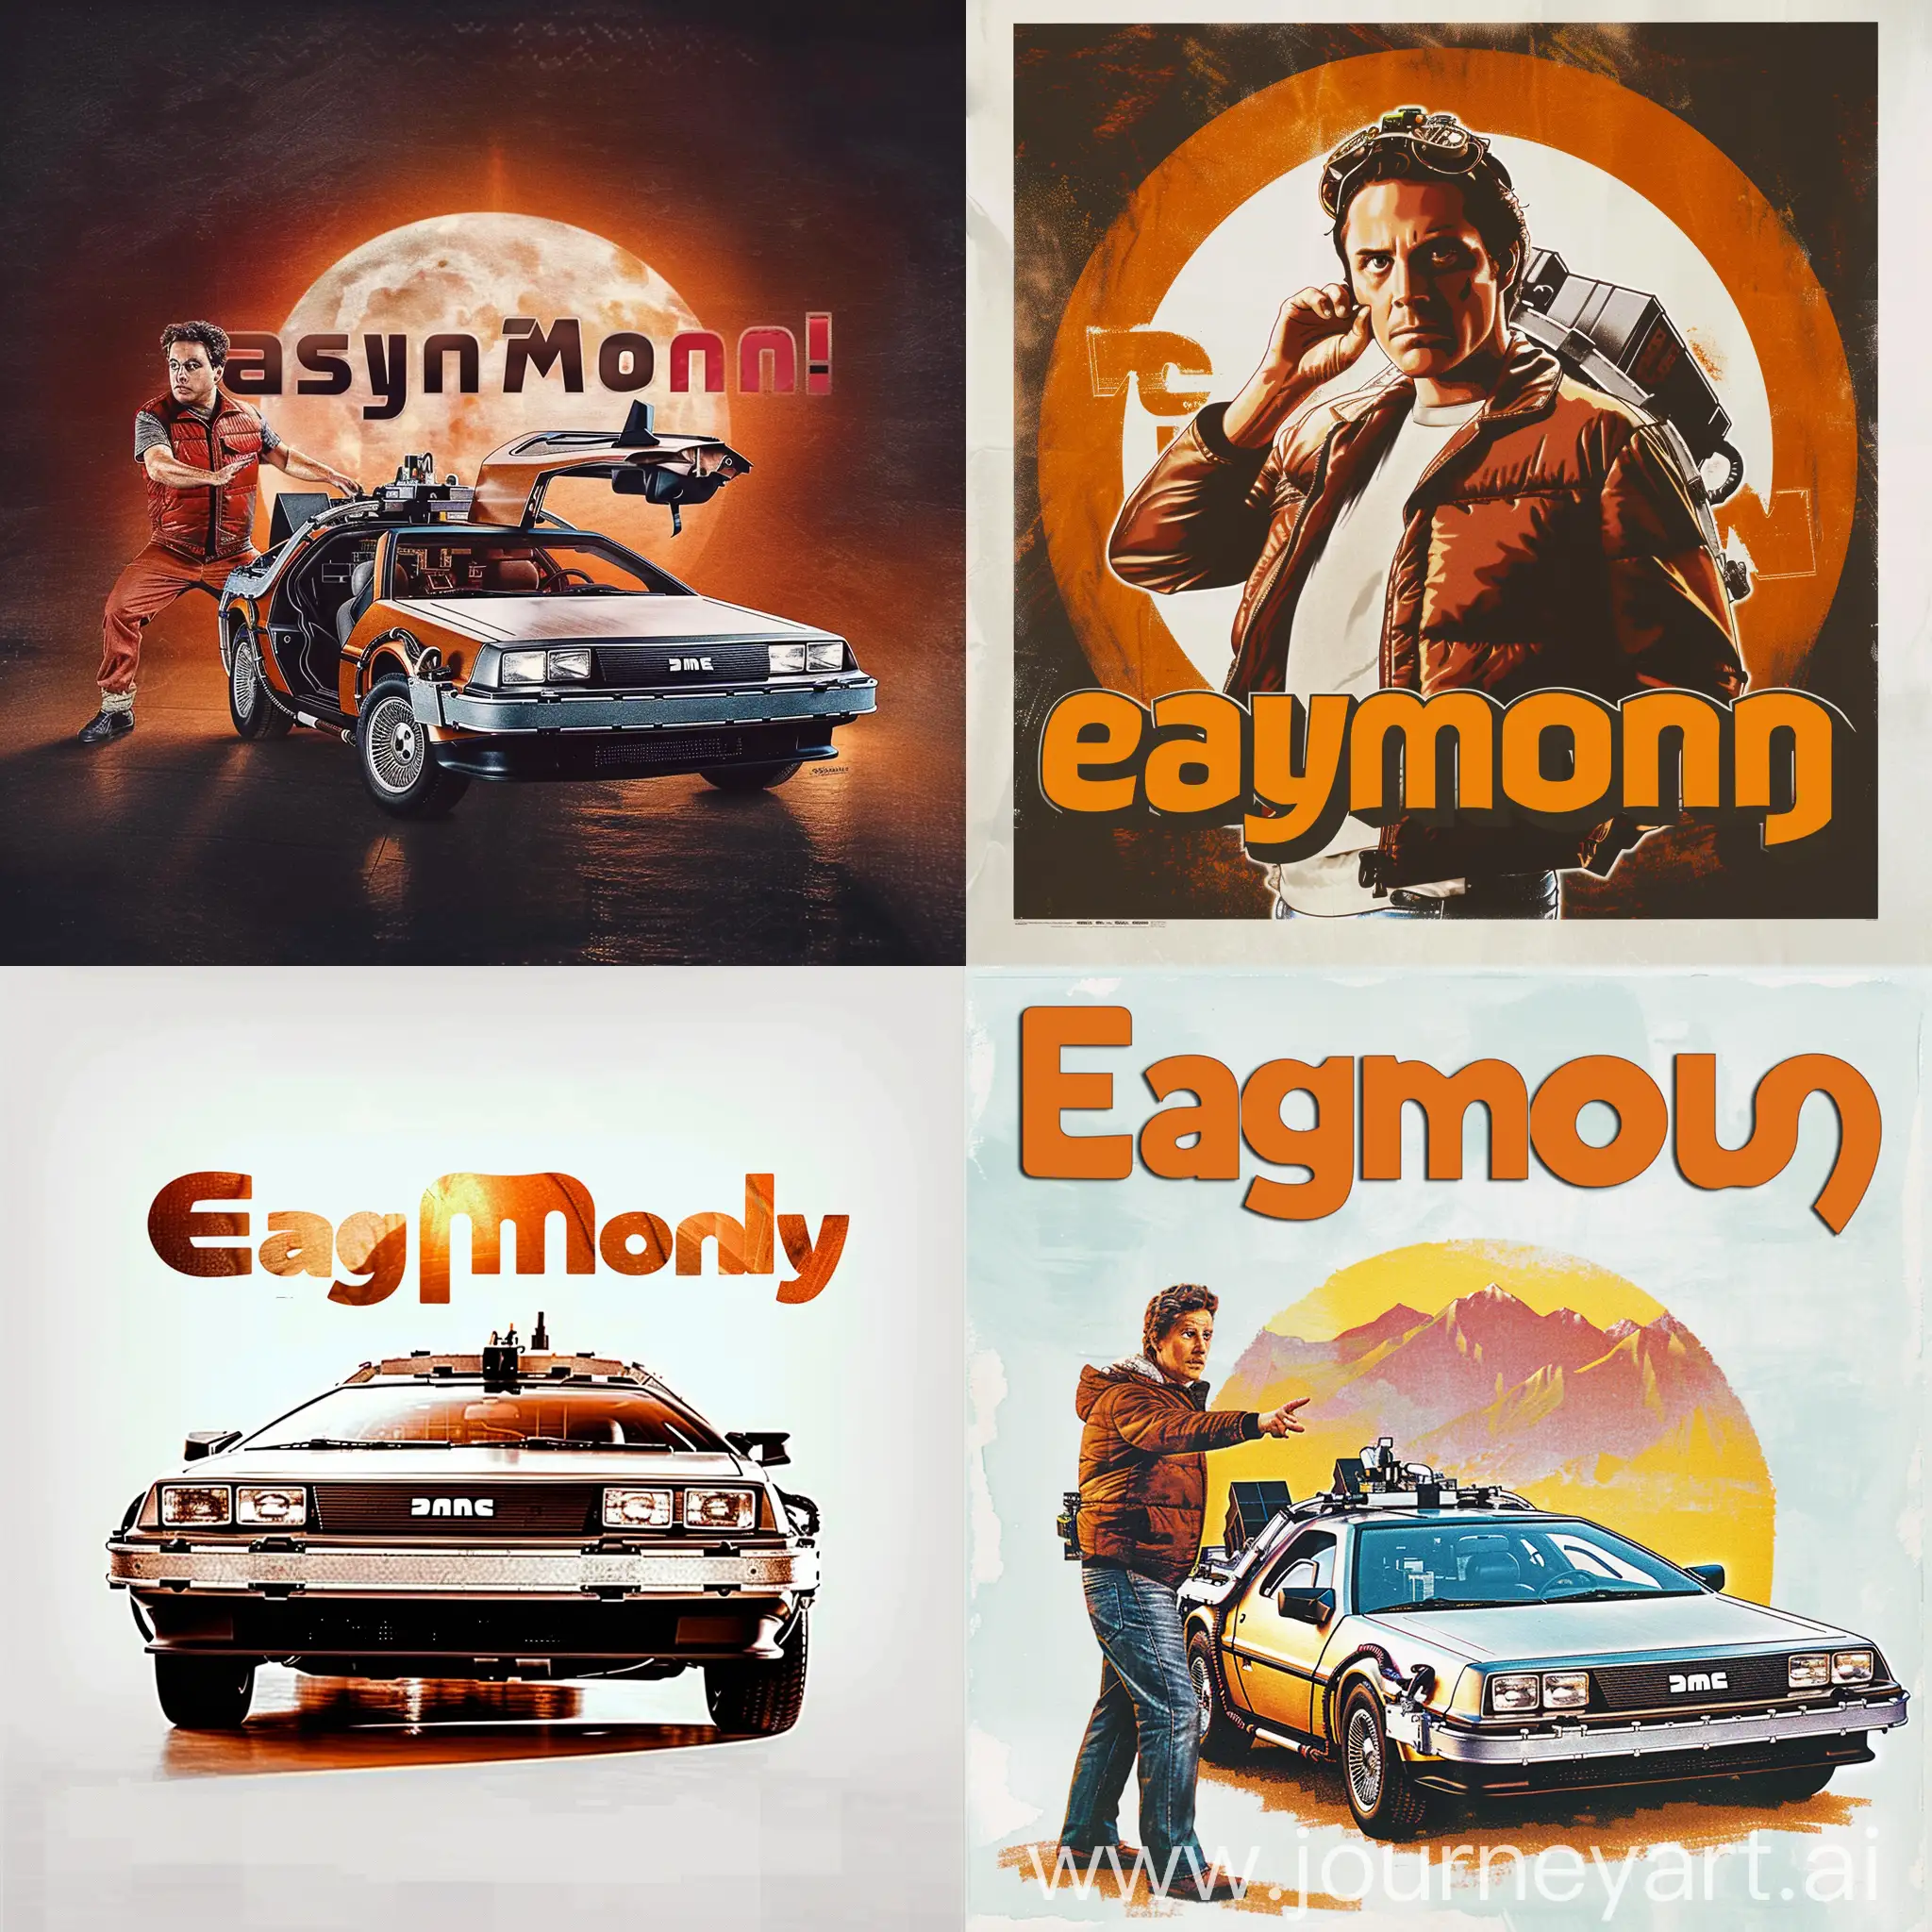 EasyMoney-Logo-in-Back-to-the-Future-Poster-Style